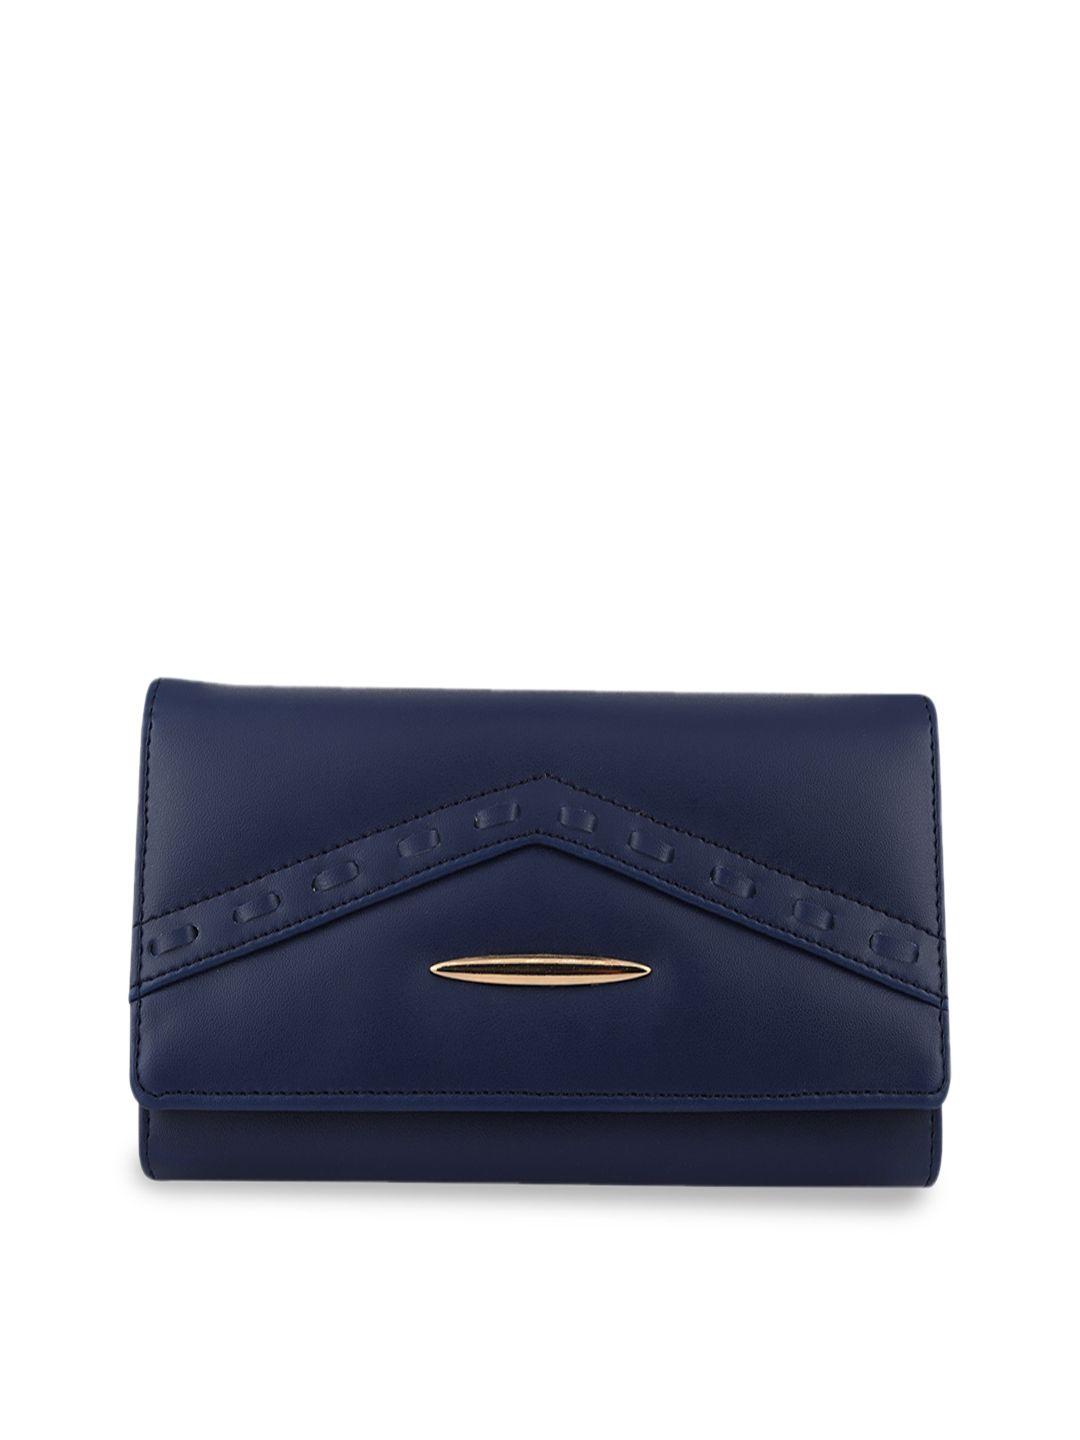 yessbenza blue quilted envelope clutch